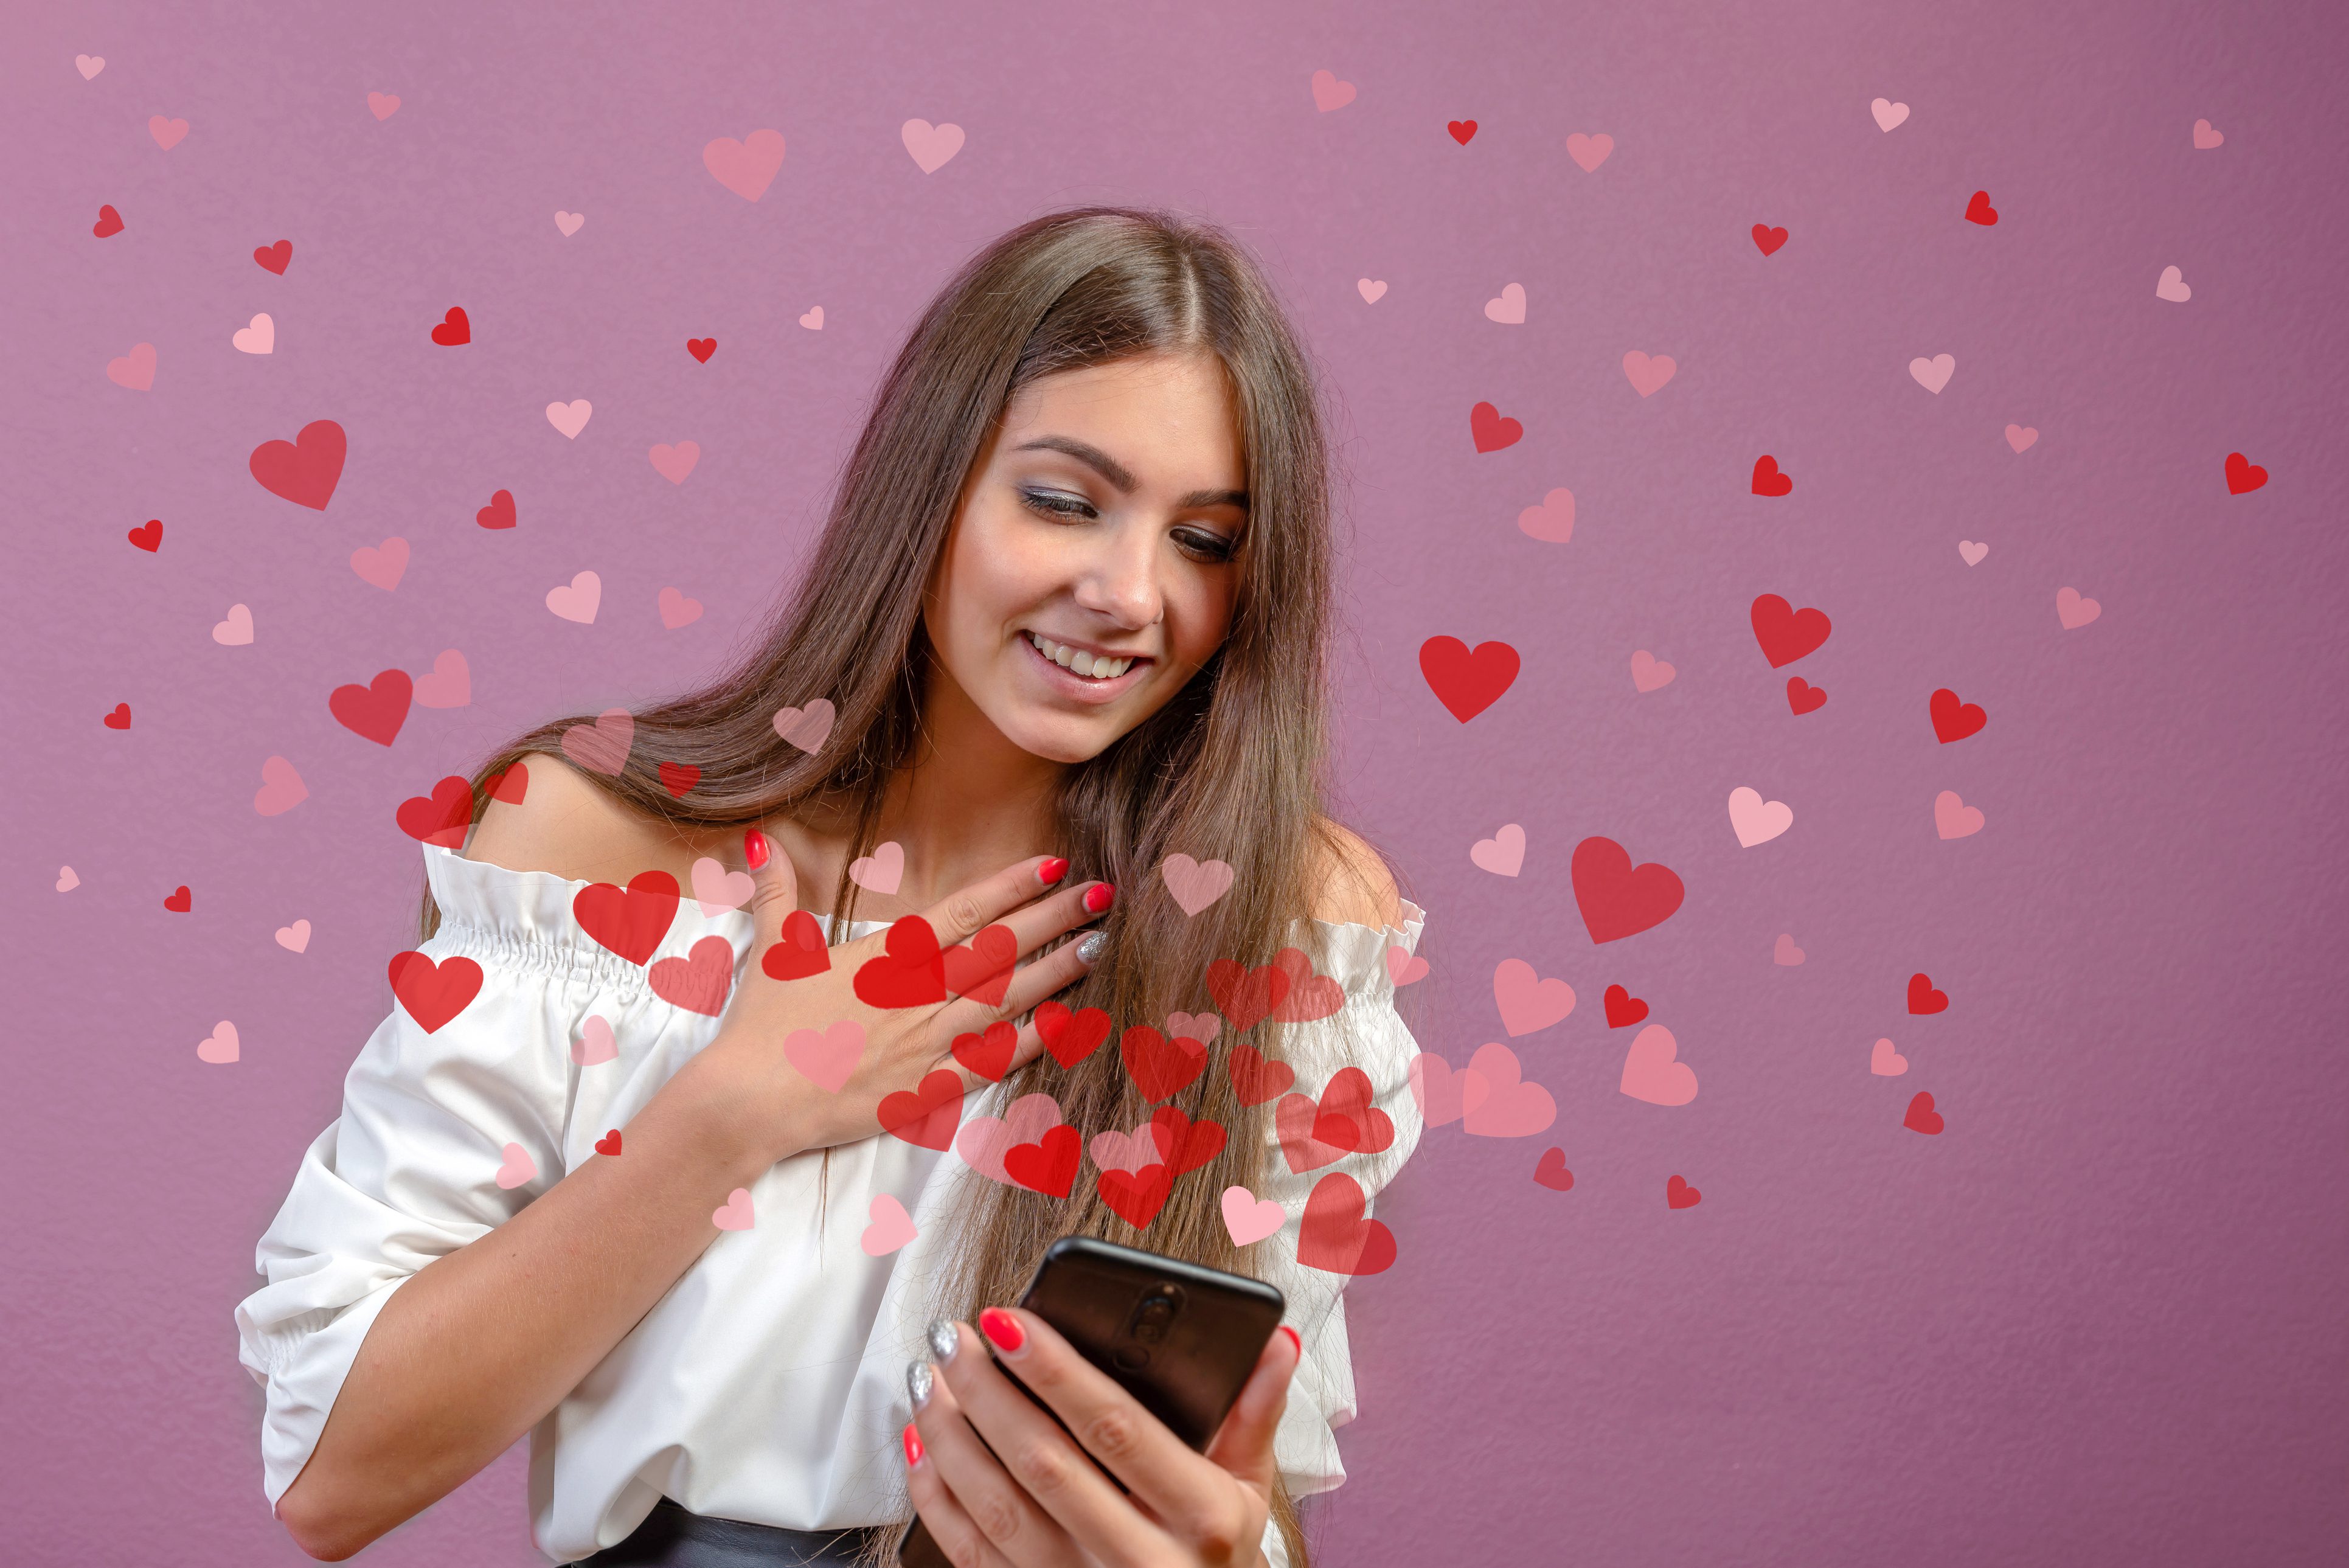 Would You Say The Odds Are Much More In A Girl's Favor When It Comes To Online Dating?